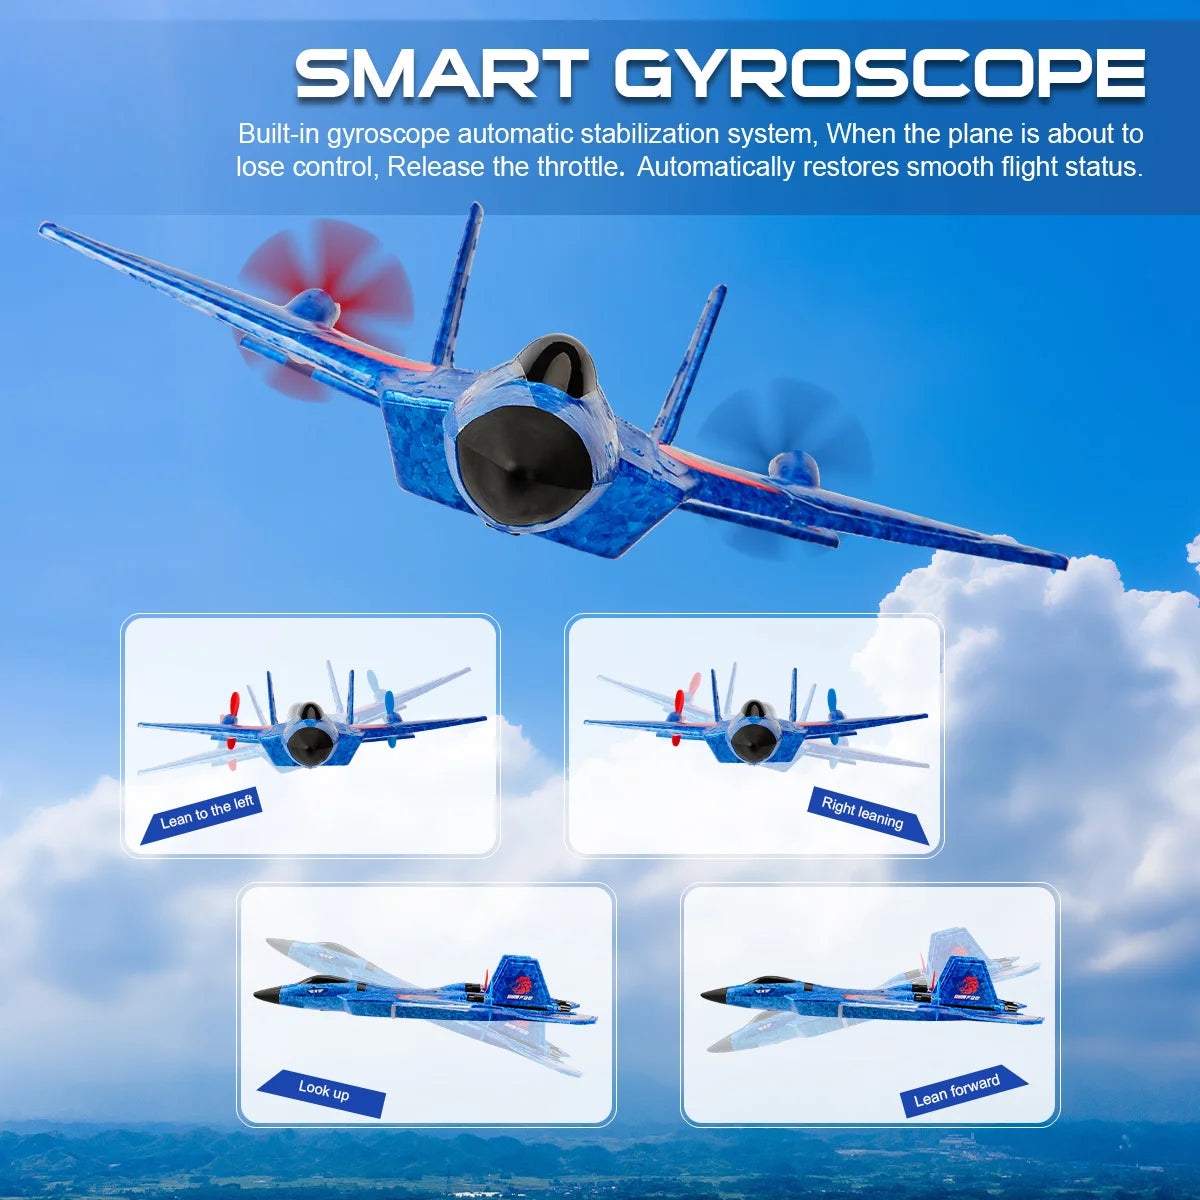 SU-27 RC Plane, built-in gyroscope automatic stabilization system automatically restores smooth flight status